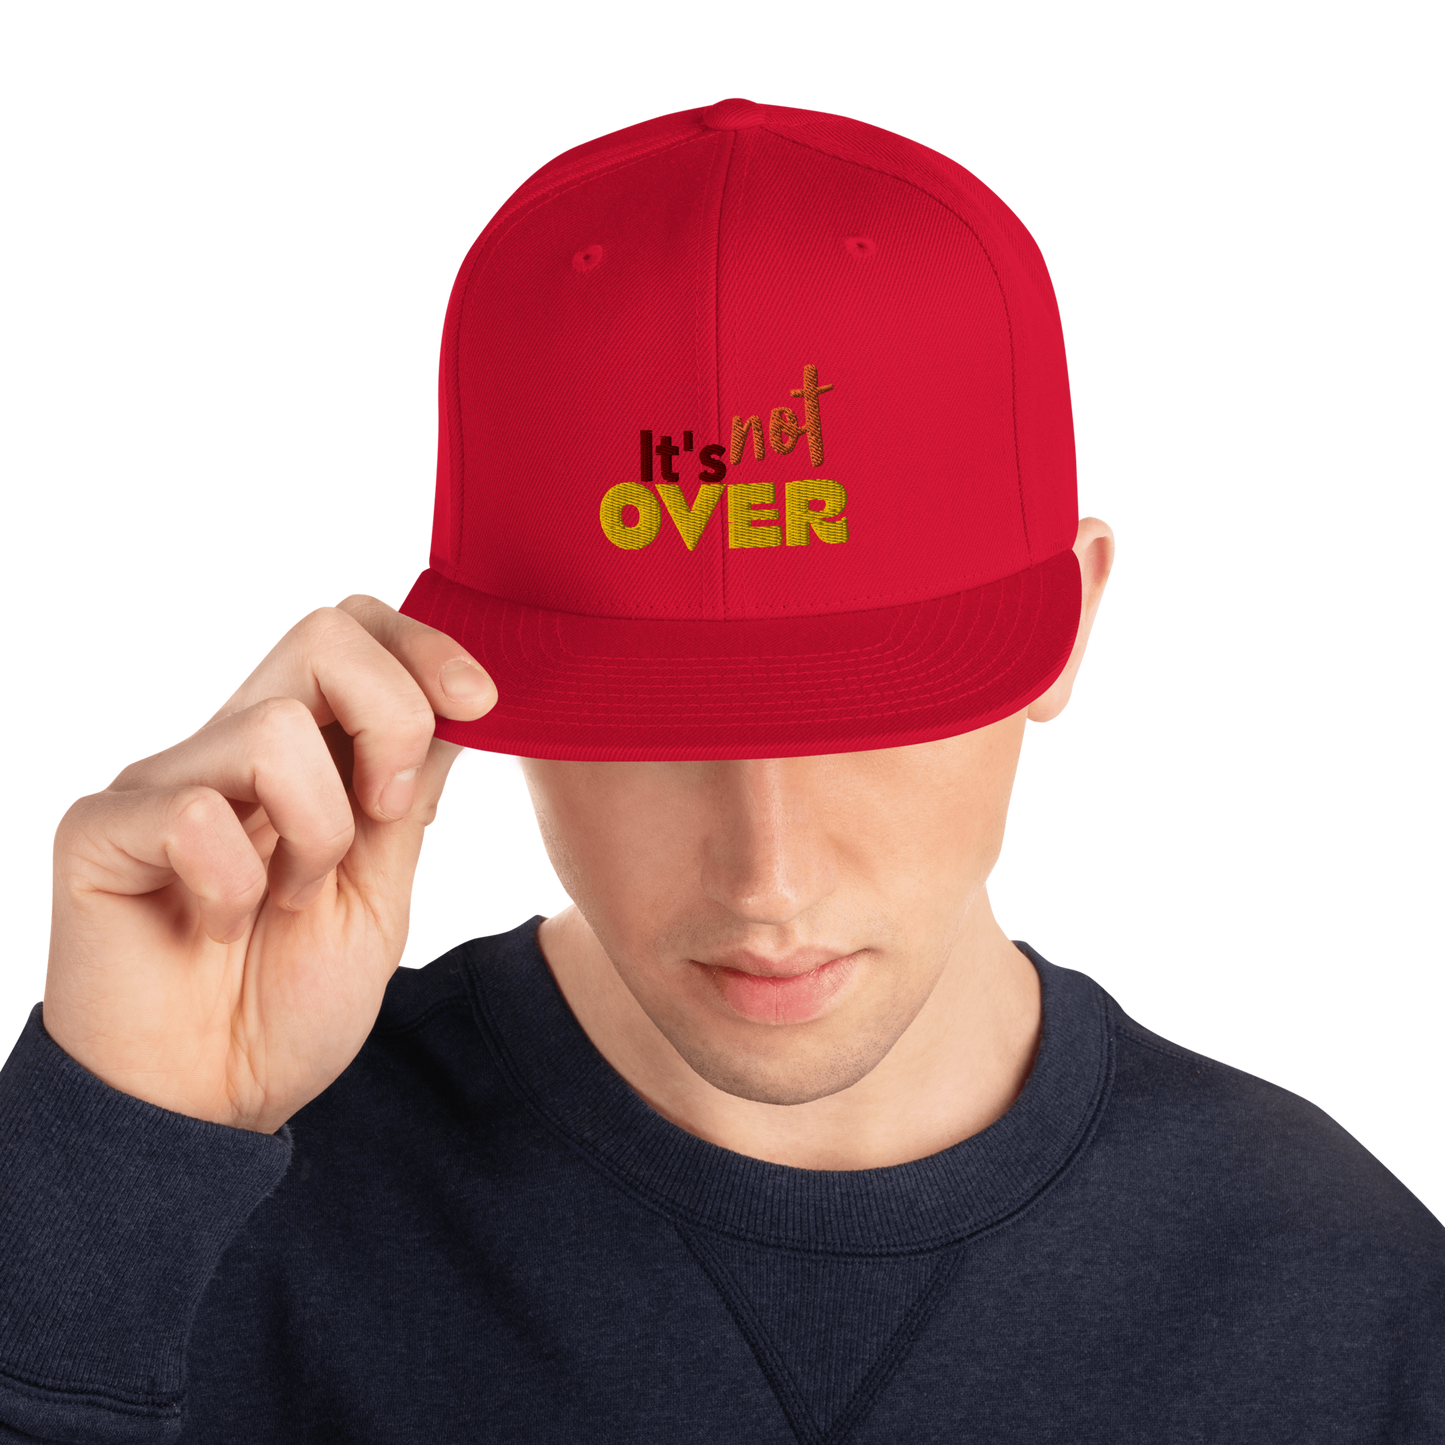 IT'S NOT OVER Snapback Hat (available in multiple NEW colors)